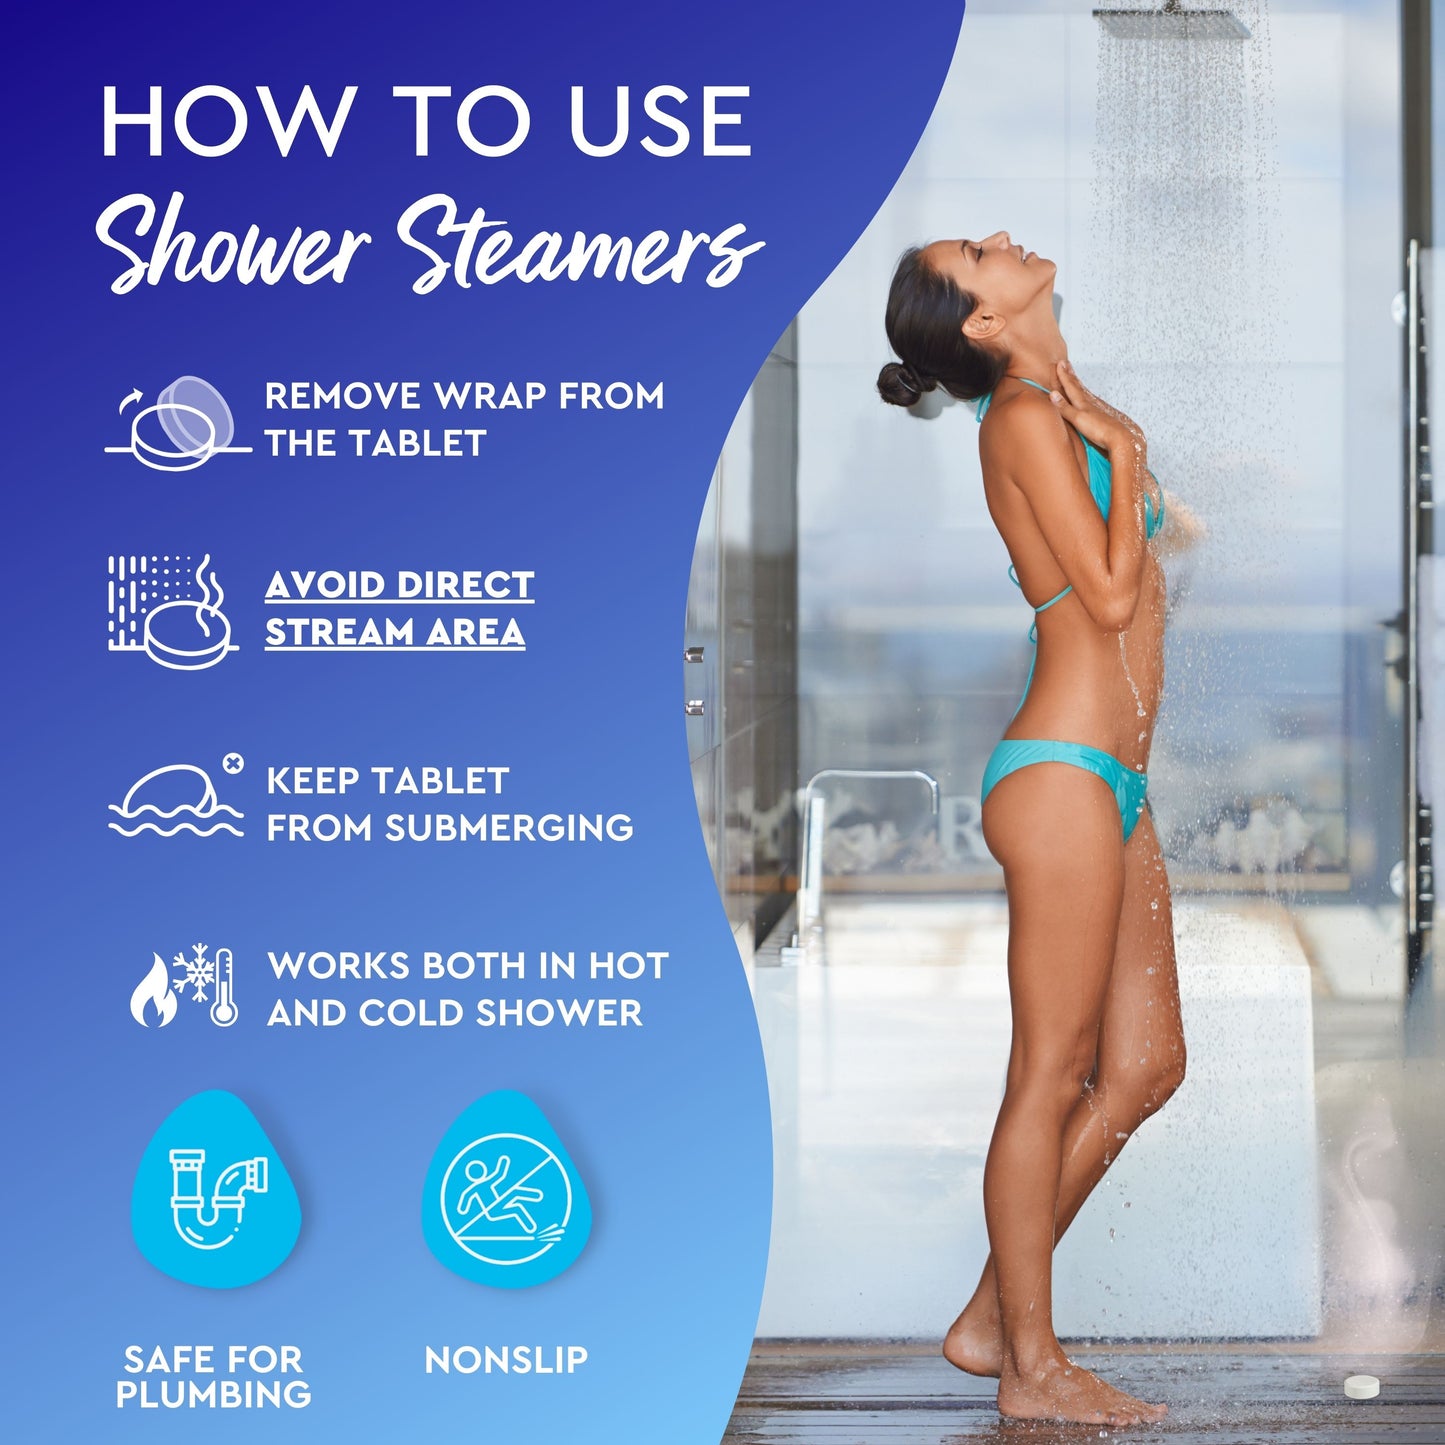 Cleverfy Blue Gift Set of 6 Shower Steamers